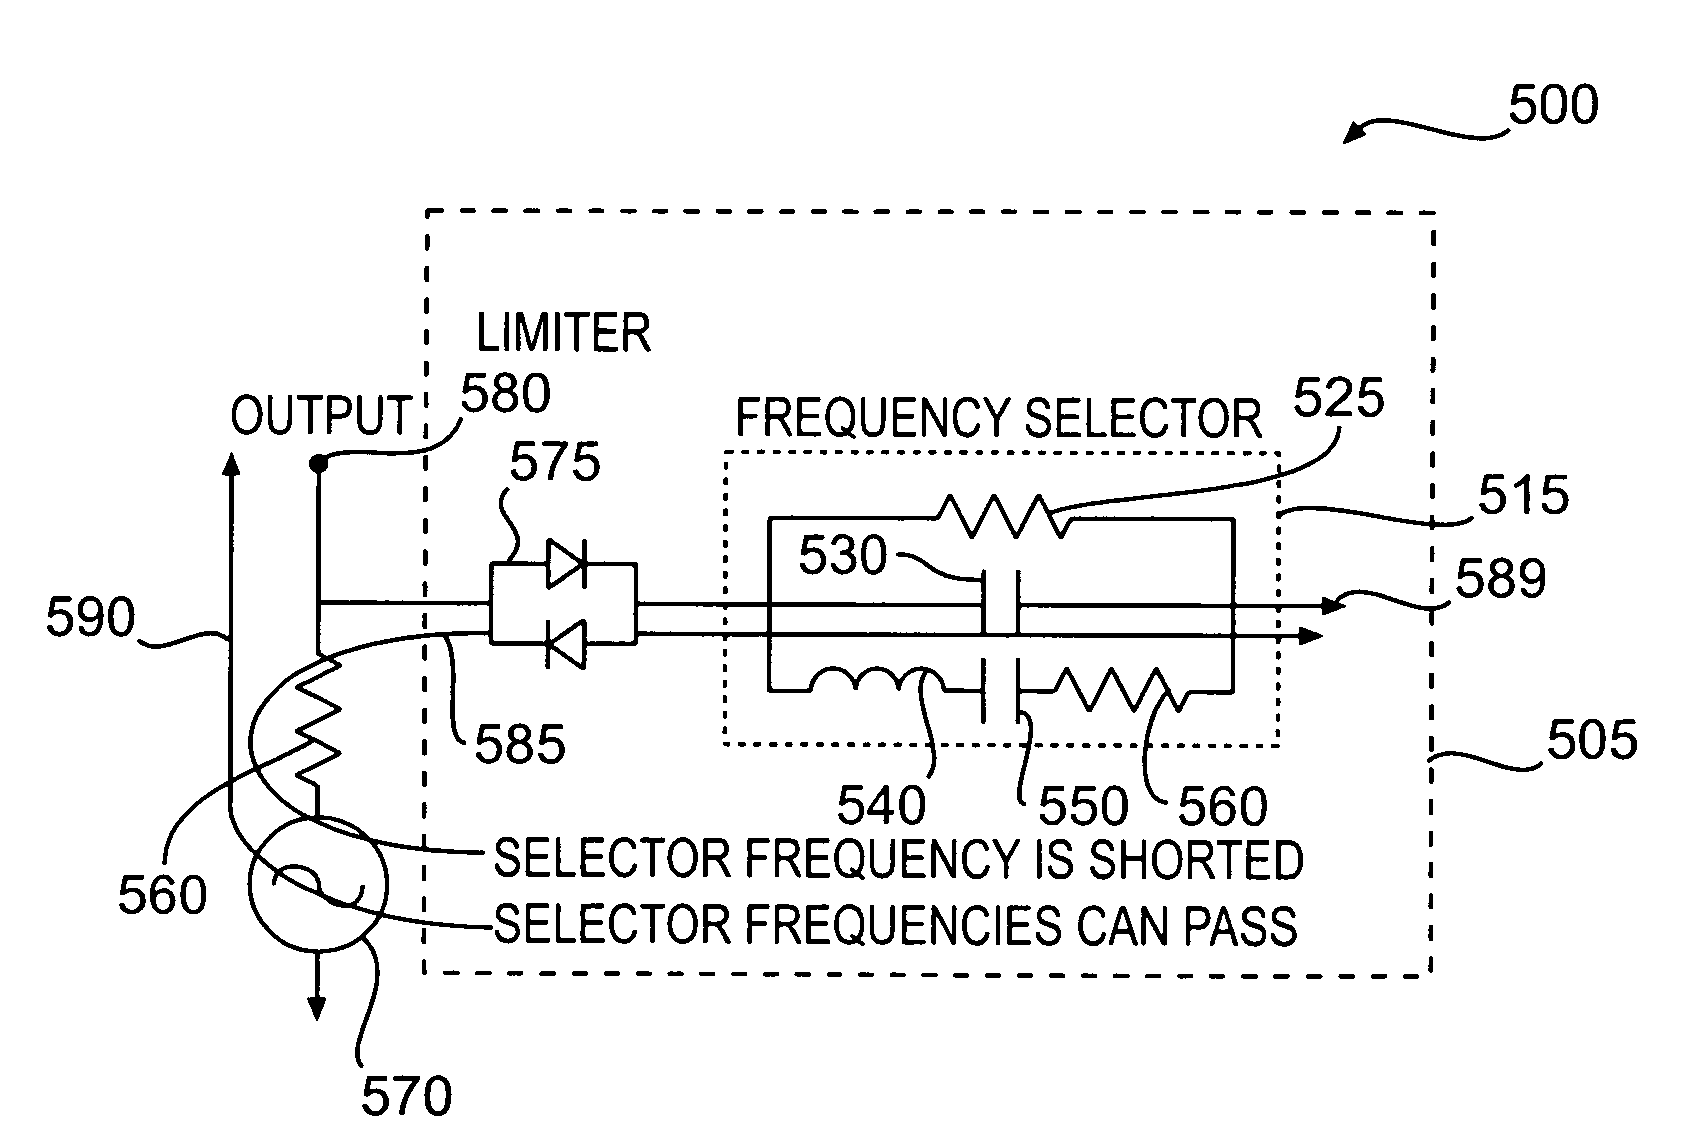 Frequency selective limiting with resonators